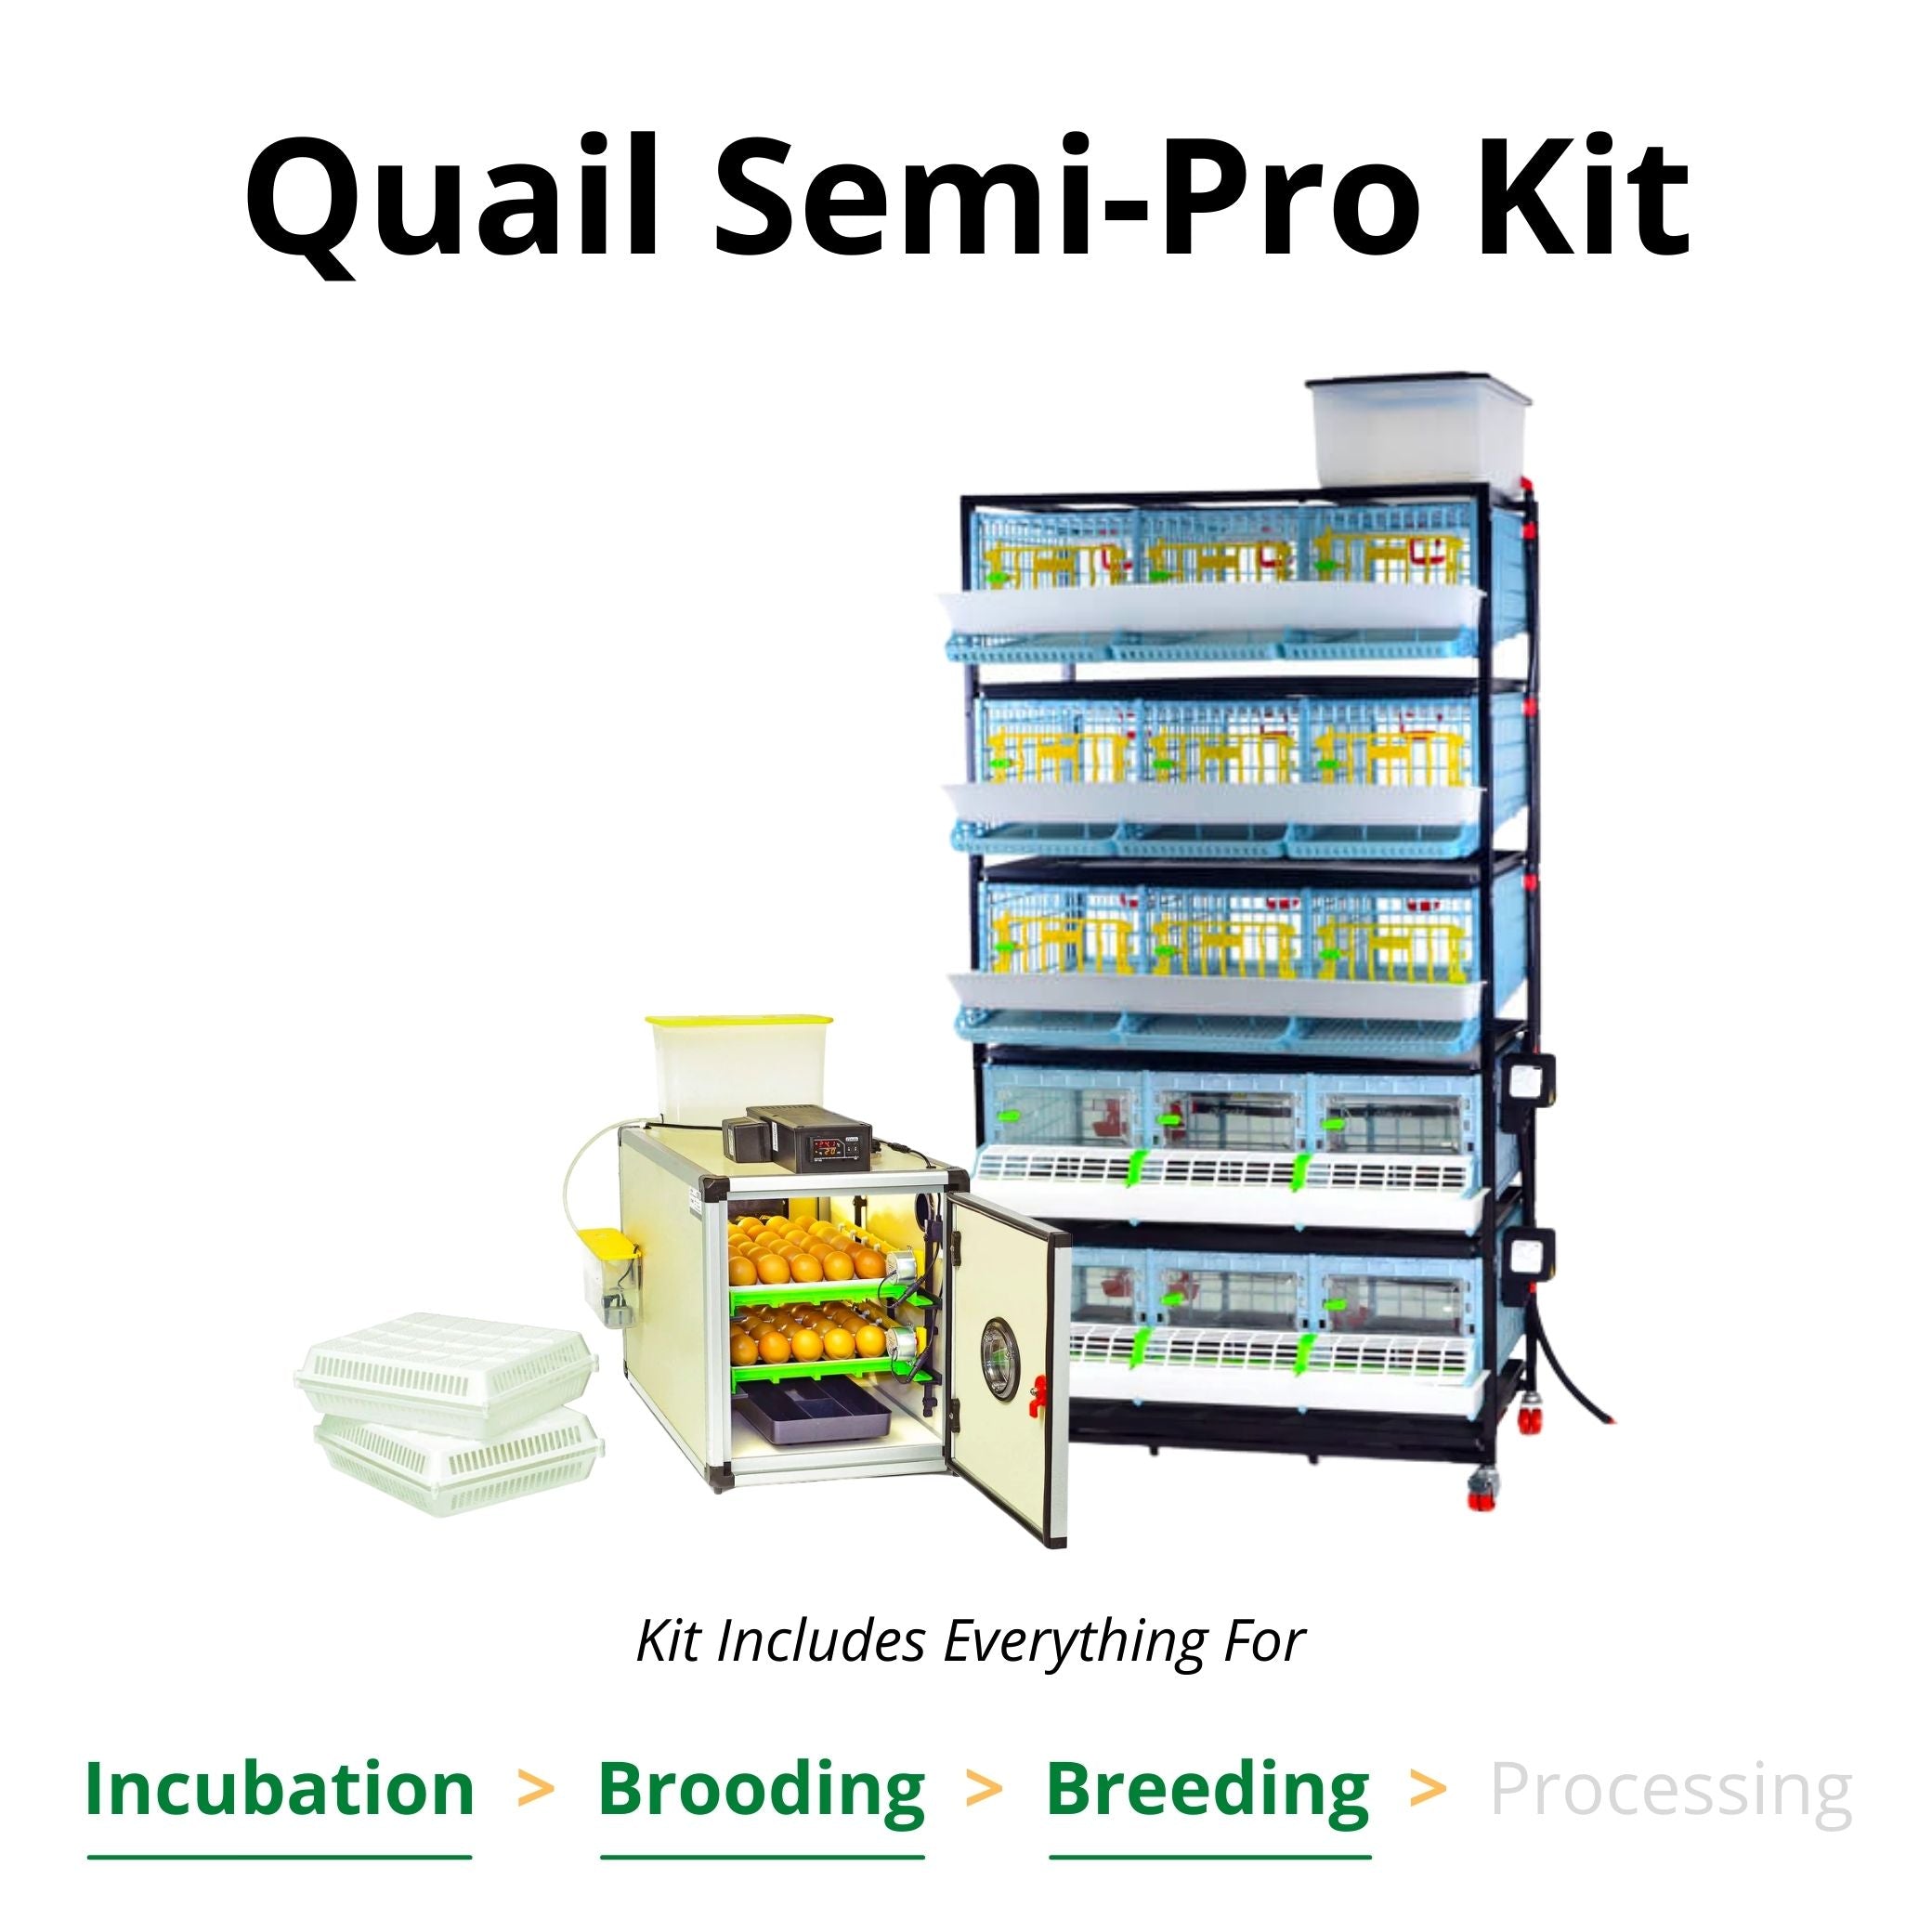 Hatching Time Cimuka. Quail semi-pro kit can be seen which includes CT60 incubator, and stacked brooder, and quail cages.